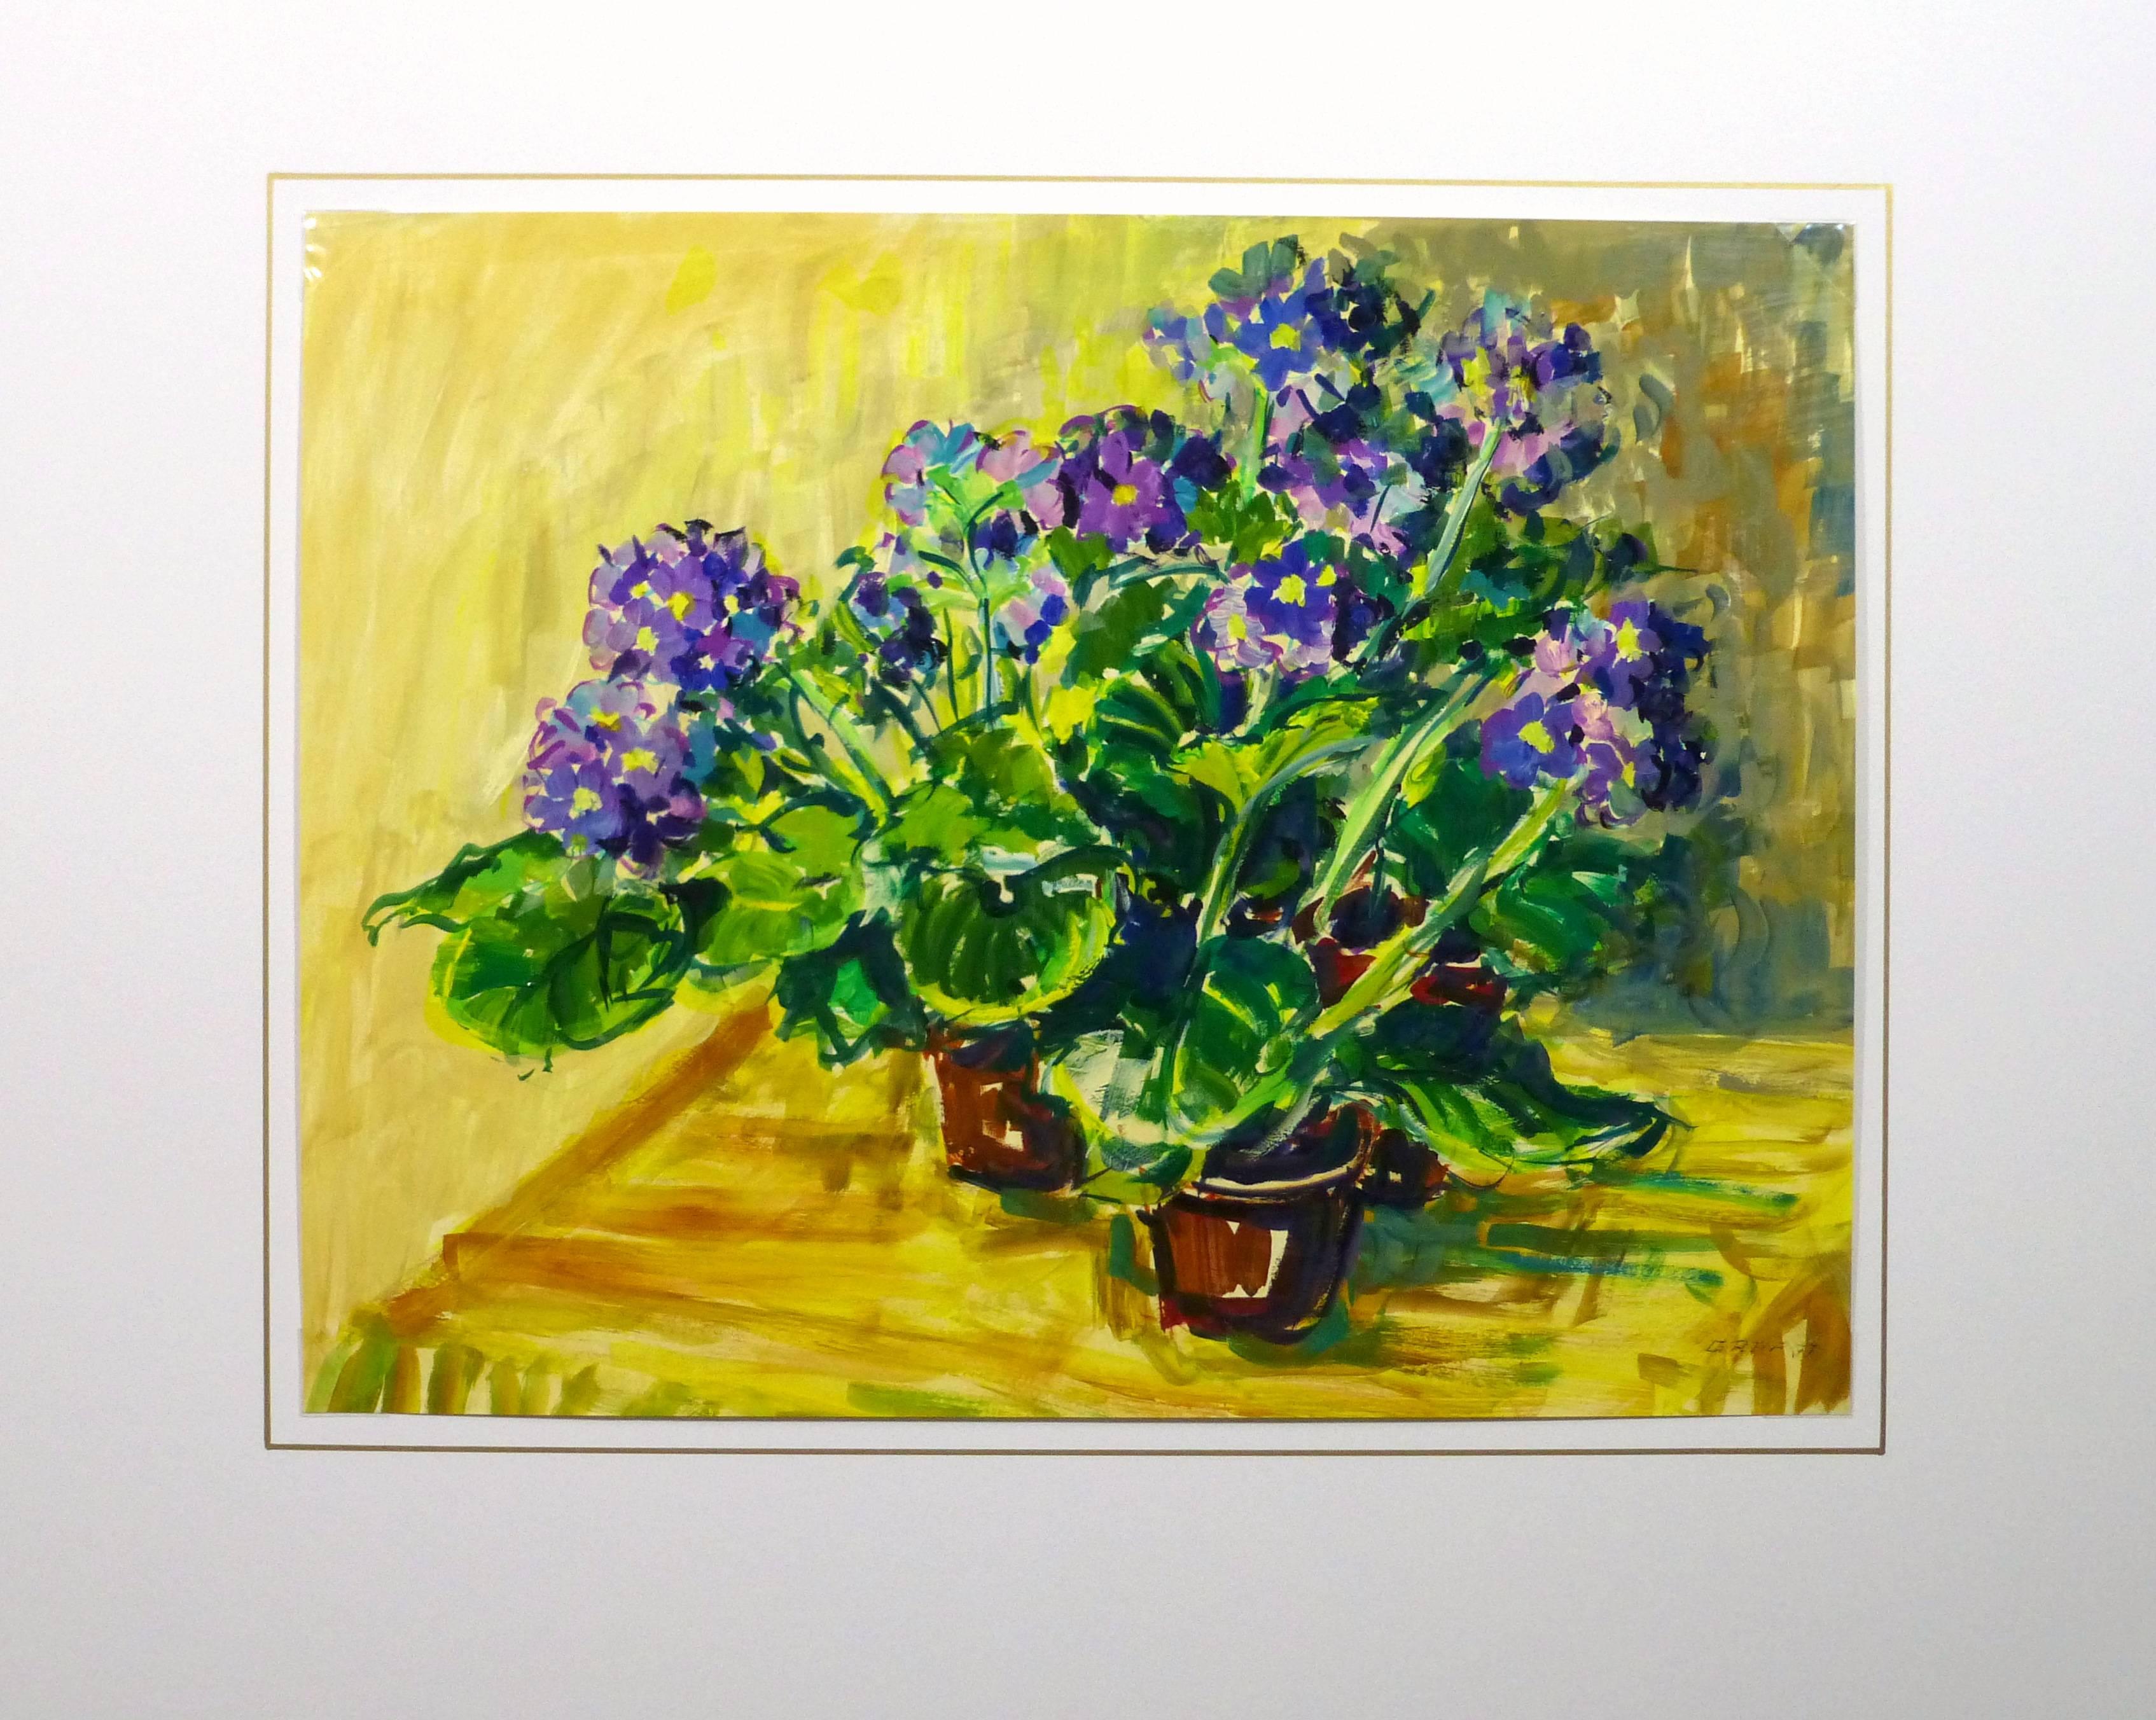 Beautiful and bright acrylic painting of a grouping of potted violets against a sunshine yellow background by Graf, 1977. Signed lower right.

Original artwork on paper displayed on a white mat with a gold border. Archival plastic sleeve and